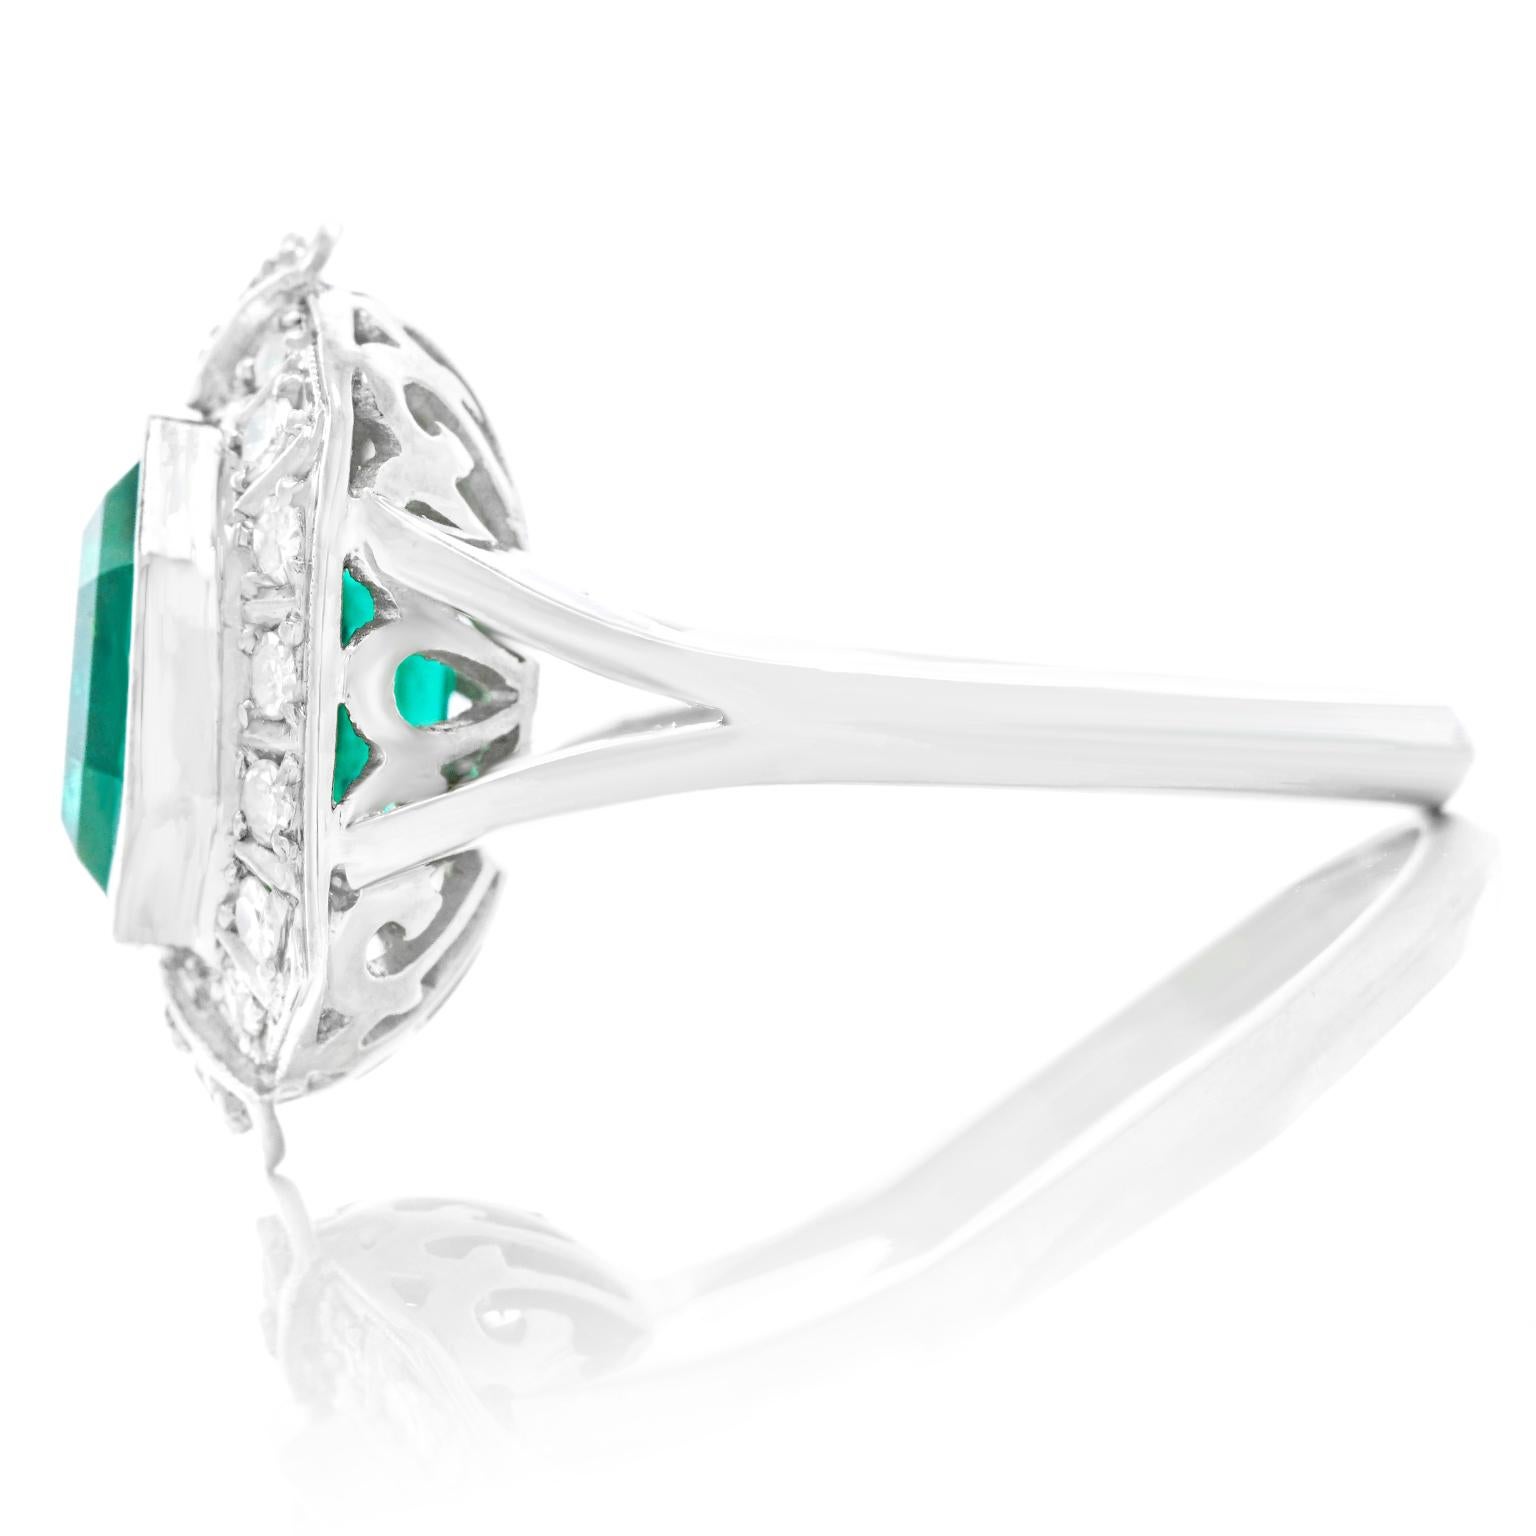 4.50 Carat Colombian Emerald and Diamond Art Deco Ring, GIA 2